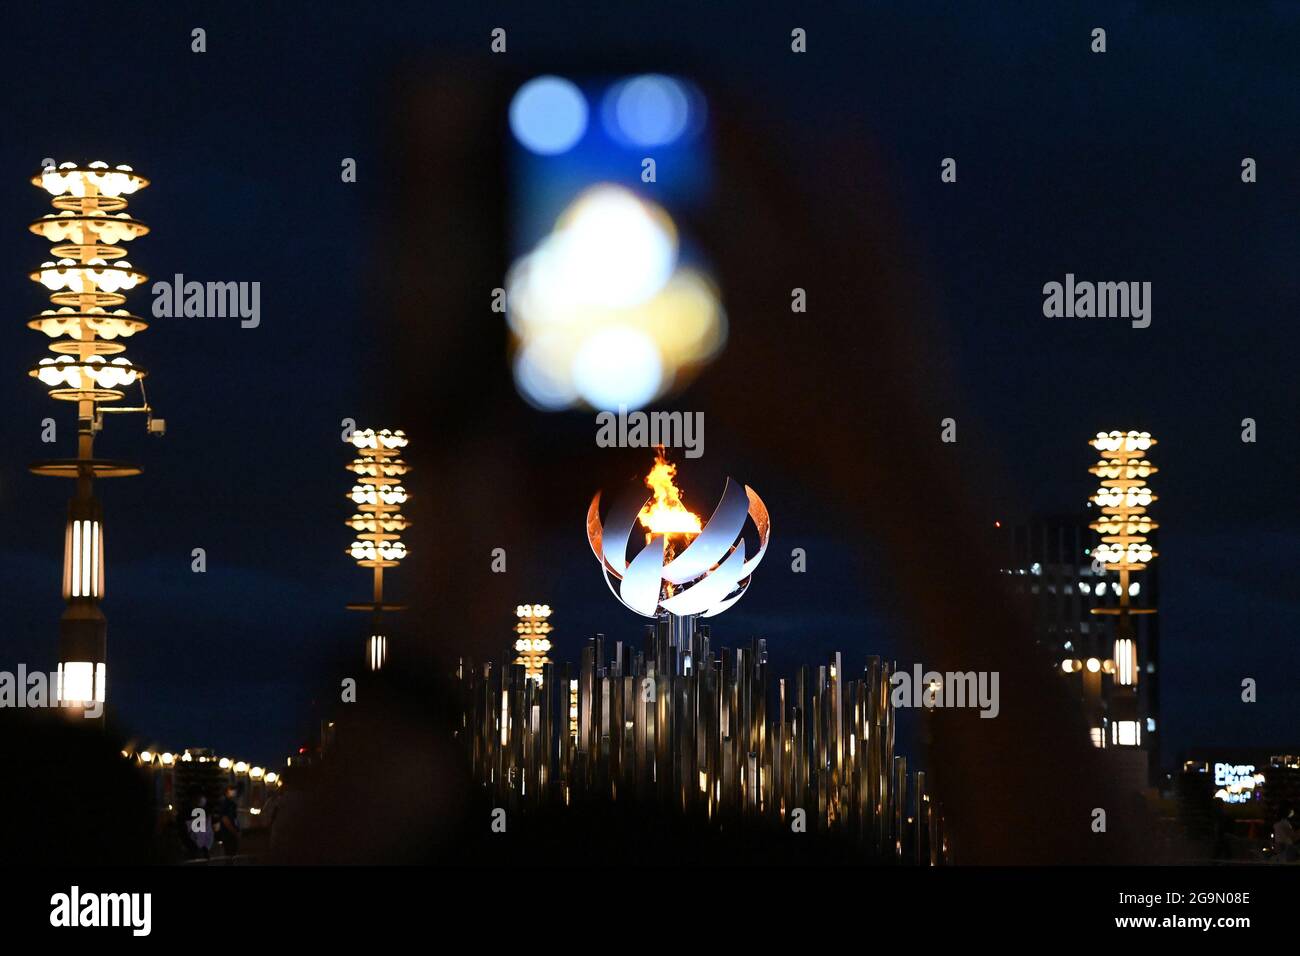 27 July 2021, Japan, Tokio: The Olympic fire is burning. The 2020 Tokyo Olympic Games will take place from 23.07.2021 to 08.08.2021. Photo: Swen Pförtner/dpa Stock Photo